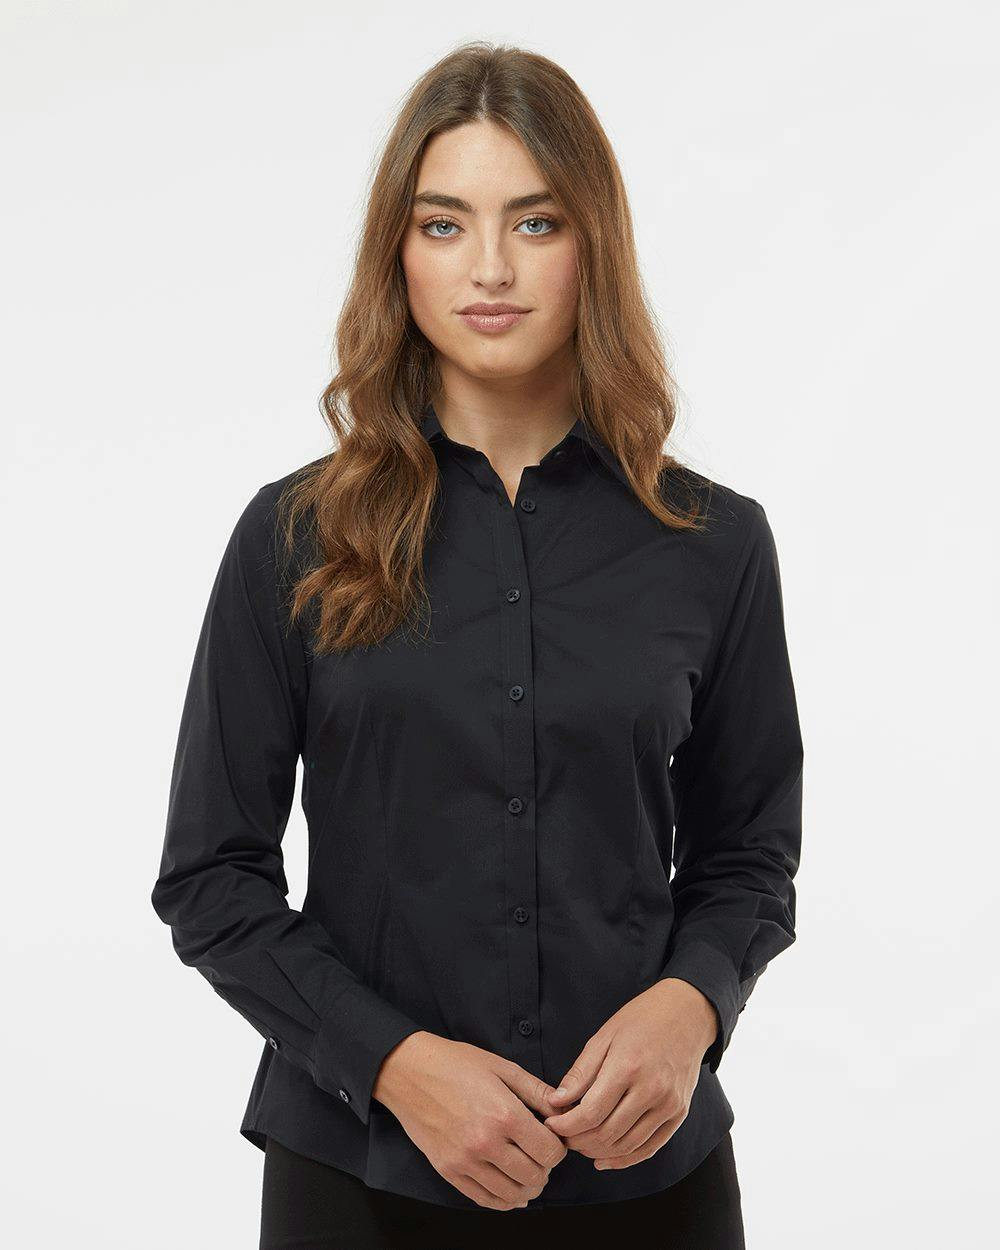 Image for Women's Stainshield Essential Shirt - 13V0480